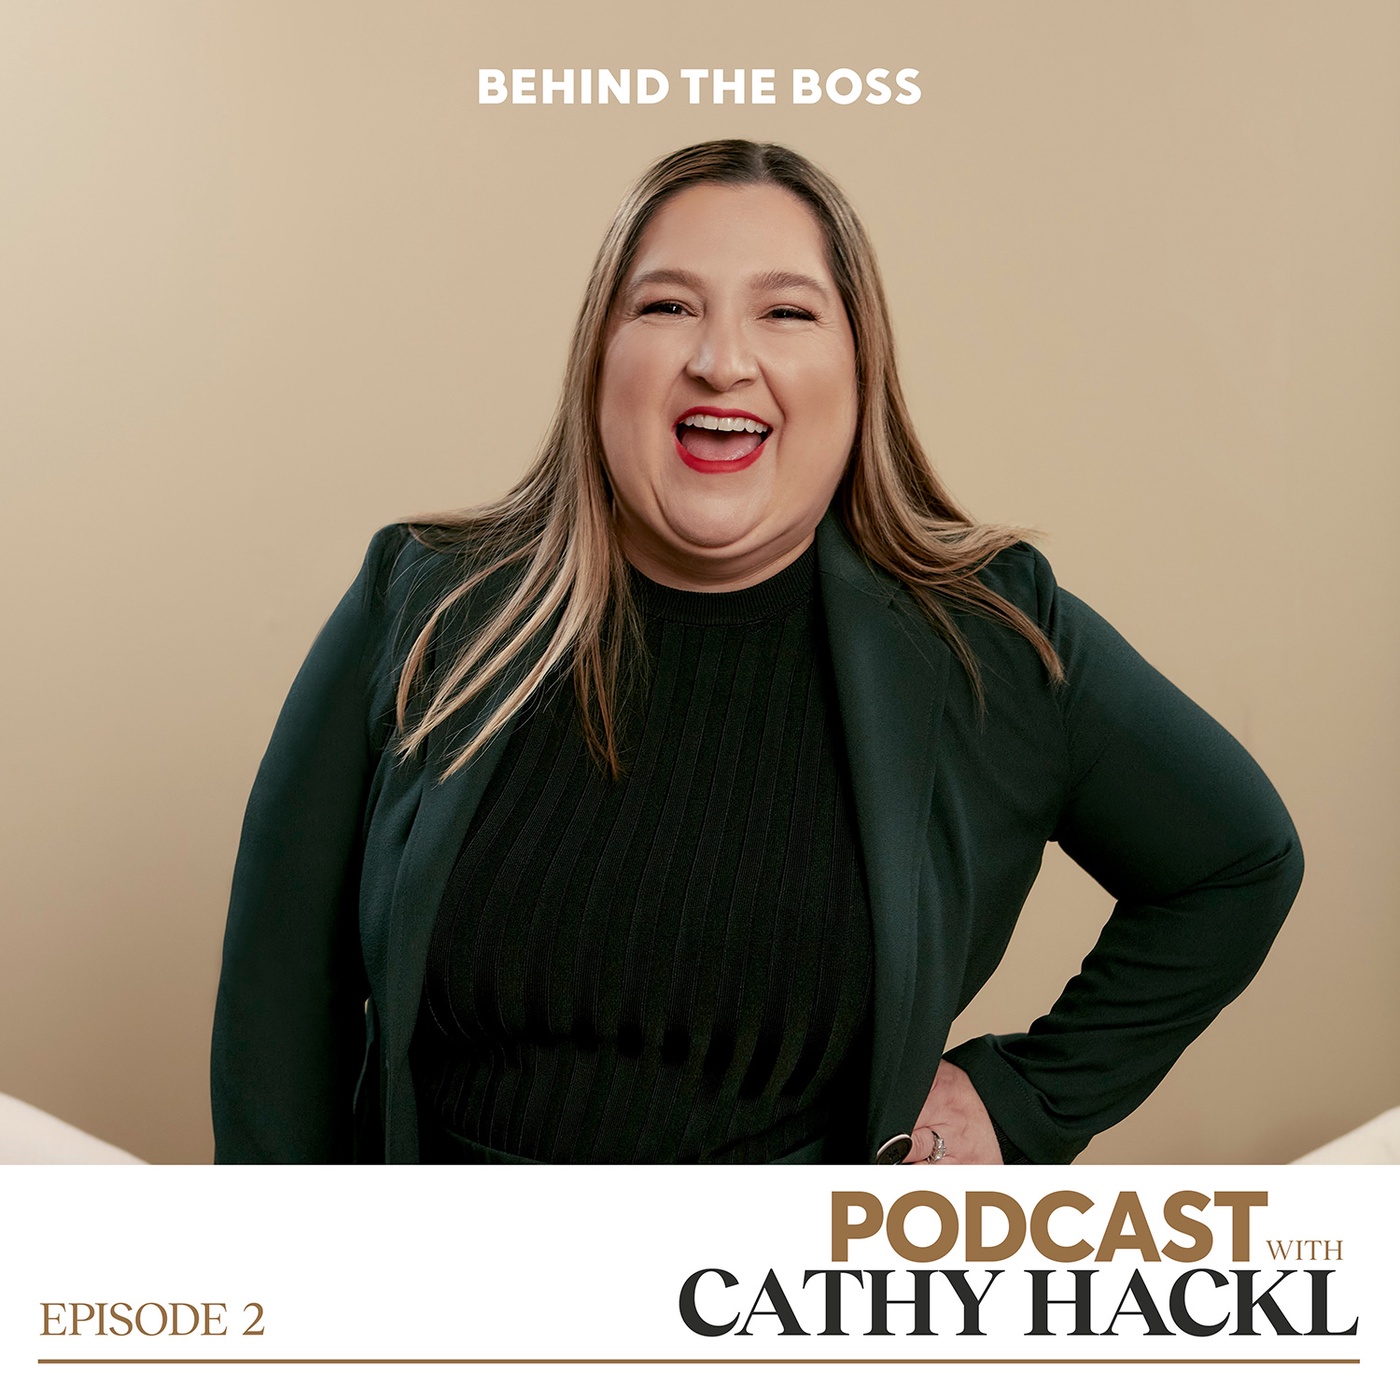 Behind the BOSS with Cathy Hackl